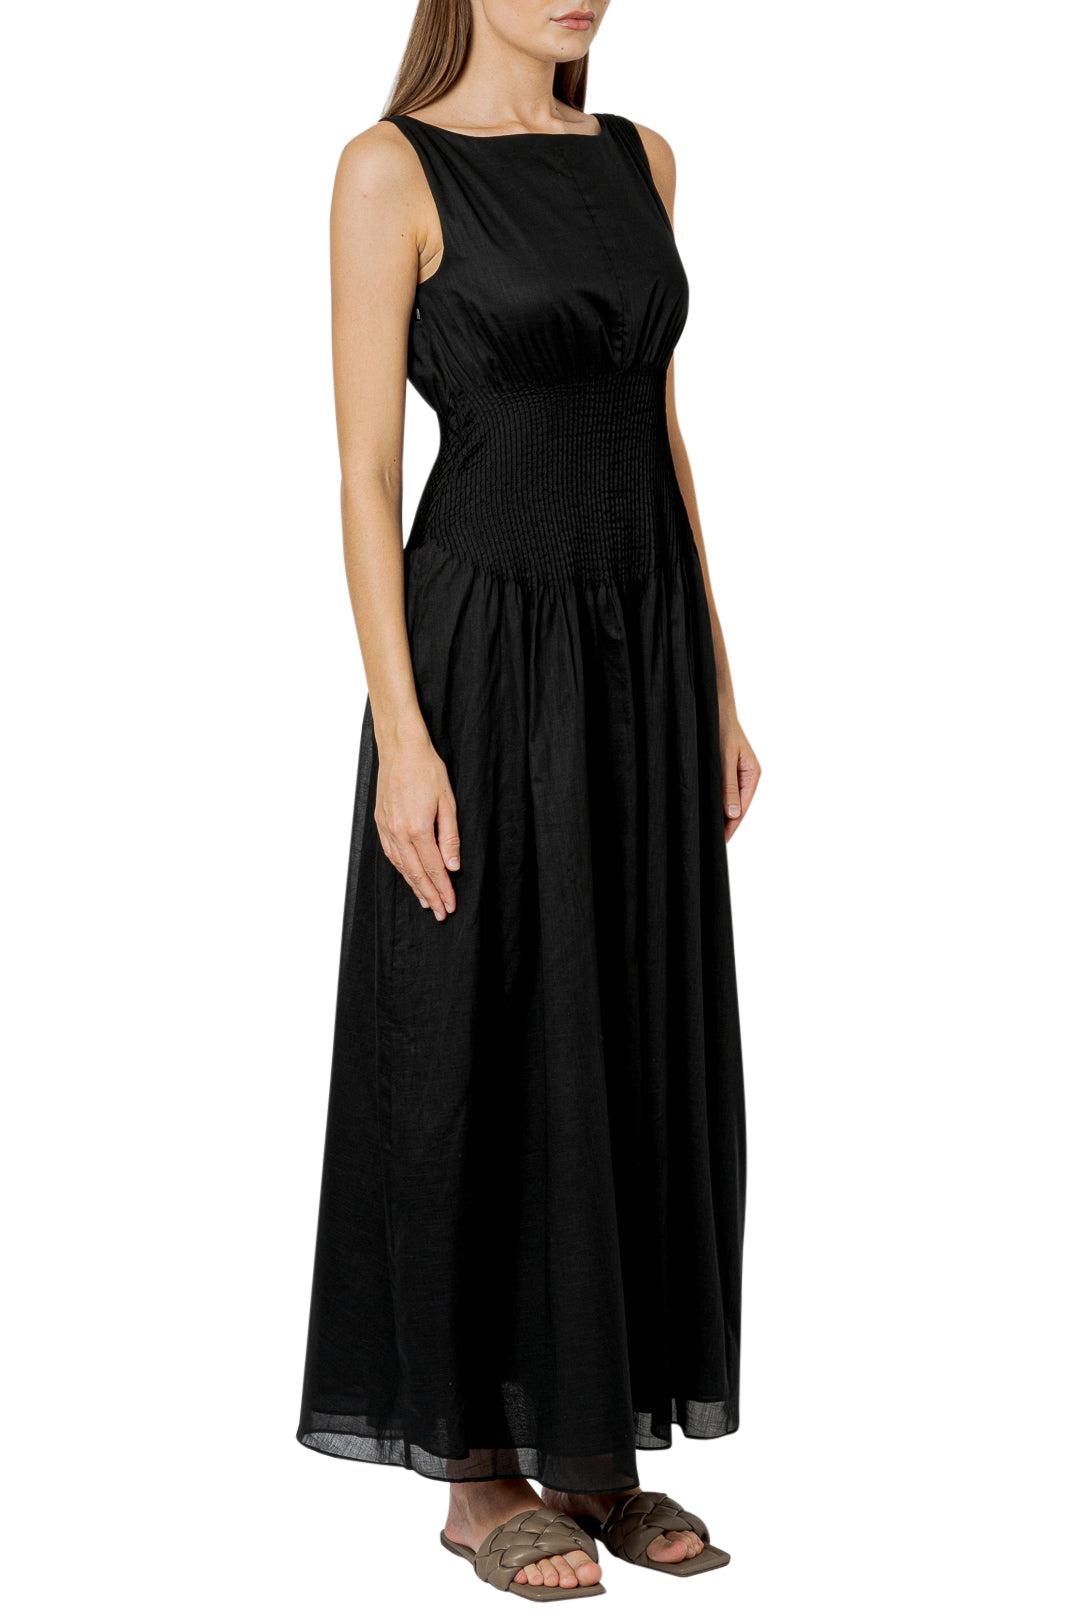 Sir The Label-Stretch long dress-dgallerystore